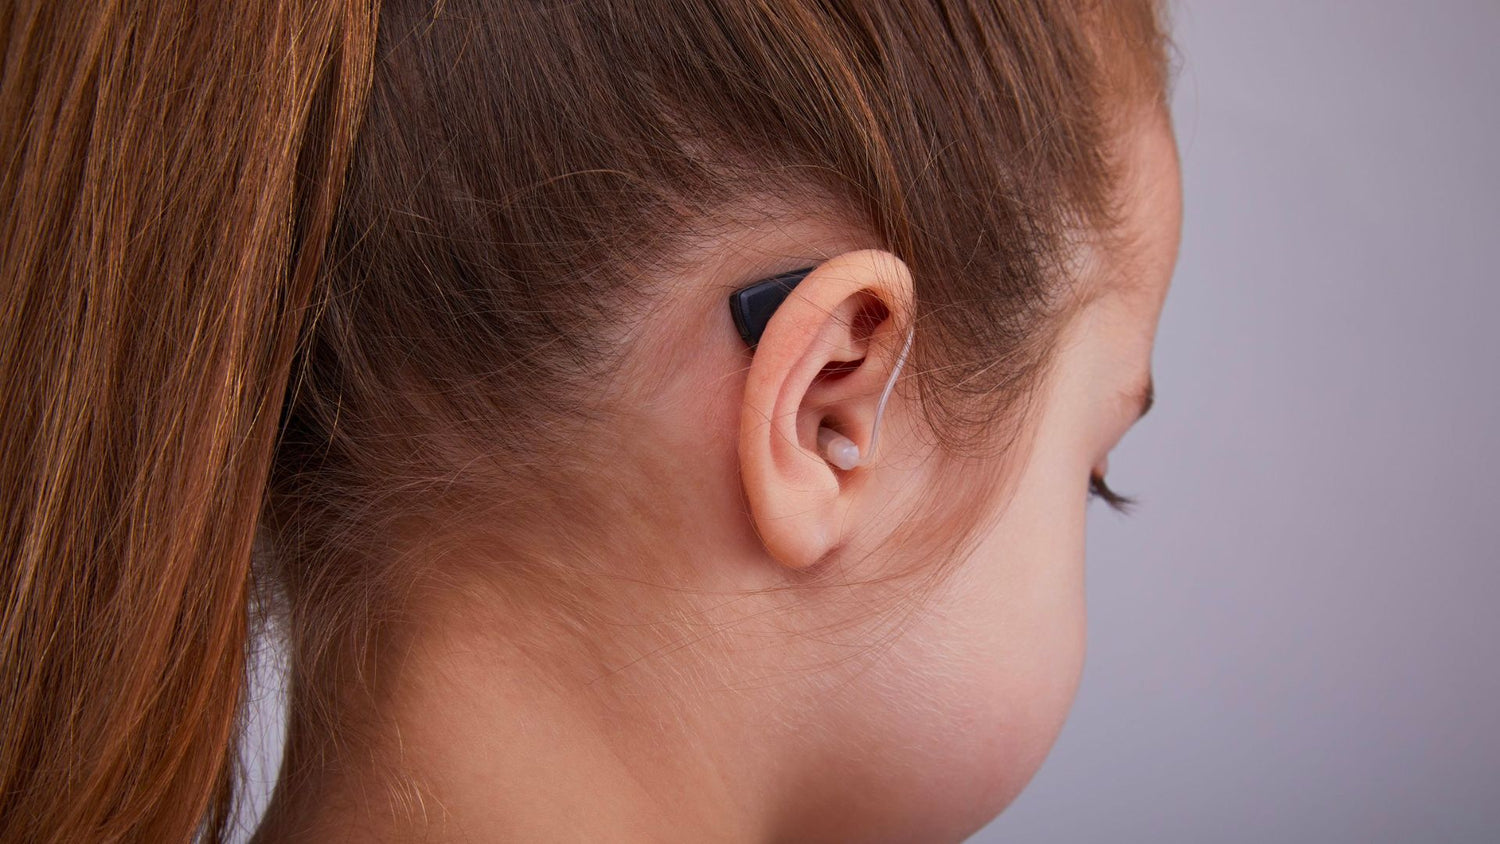 Top 10 Strategies to Encourage Your Kids to Keep Wearing the Hearing Aids